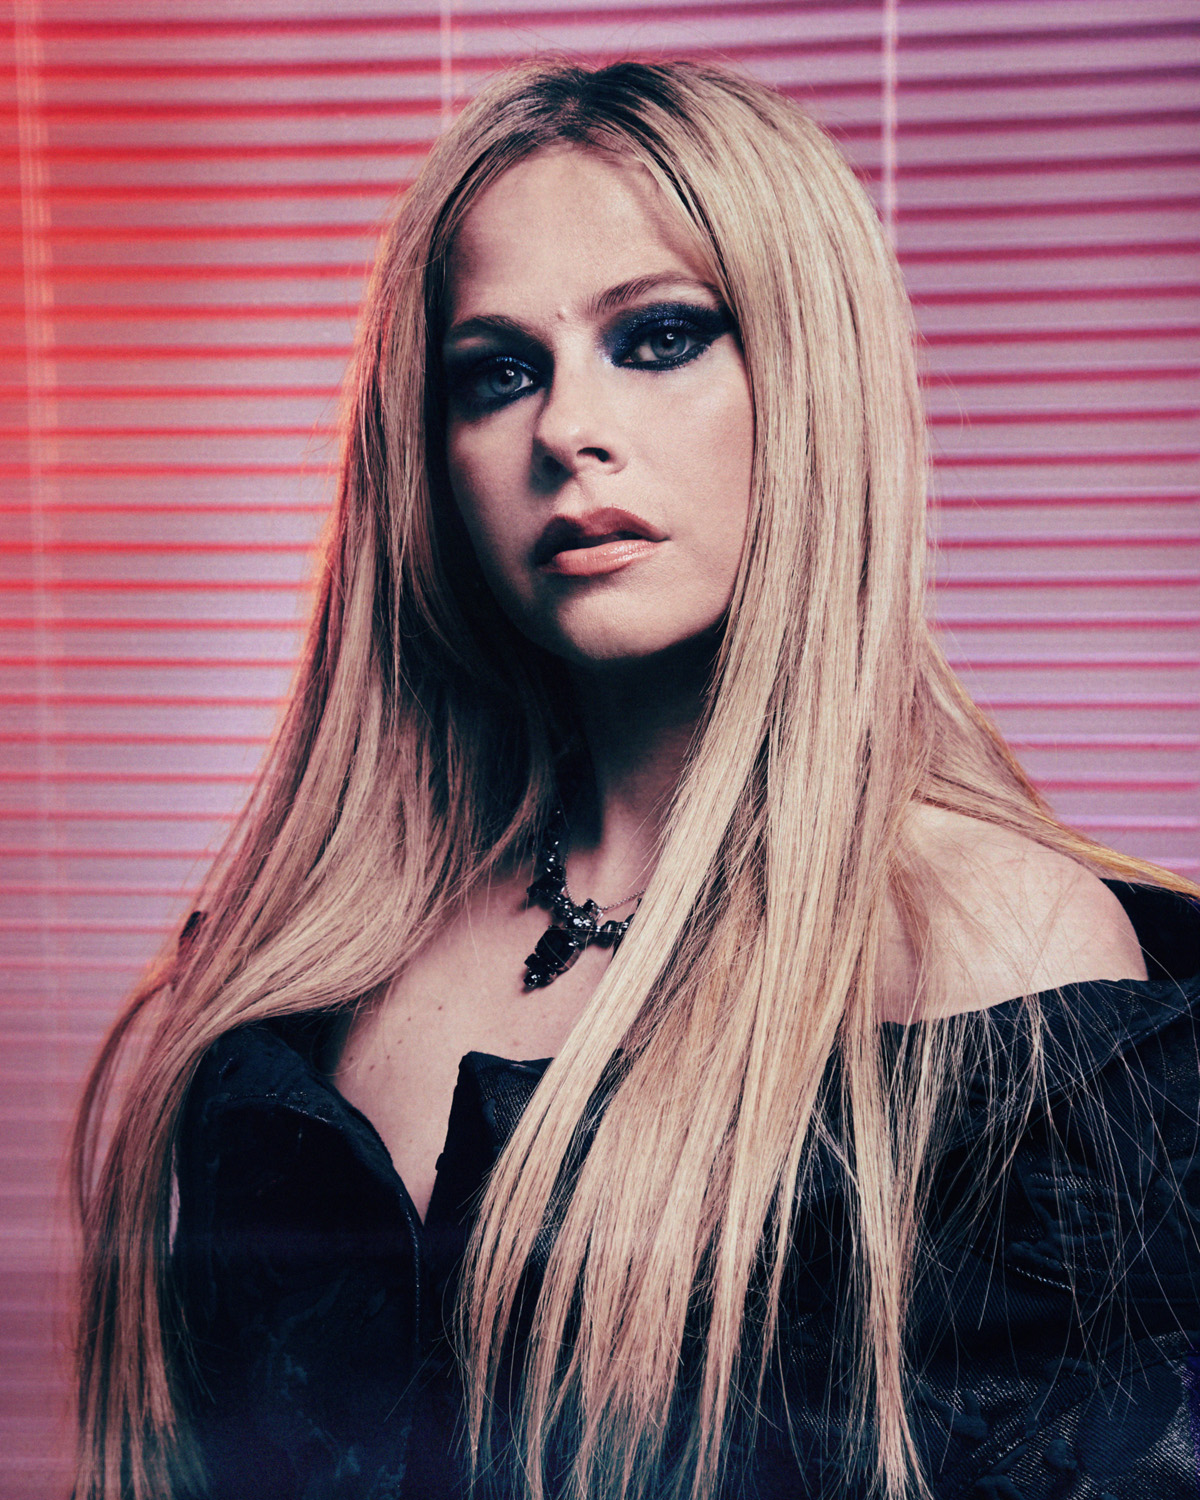 HOW AVRIL LAVIGNE SHAPED THE POP-PUNK SCENE AND INSPIRED A GENERATION